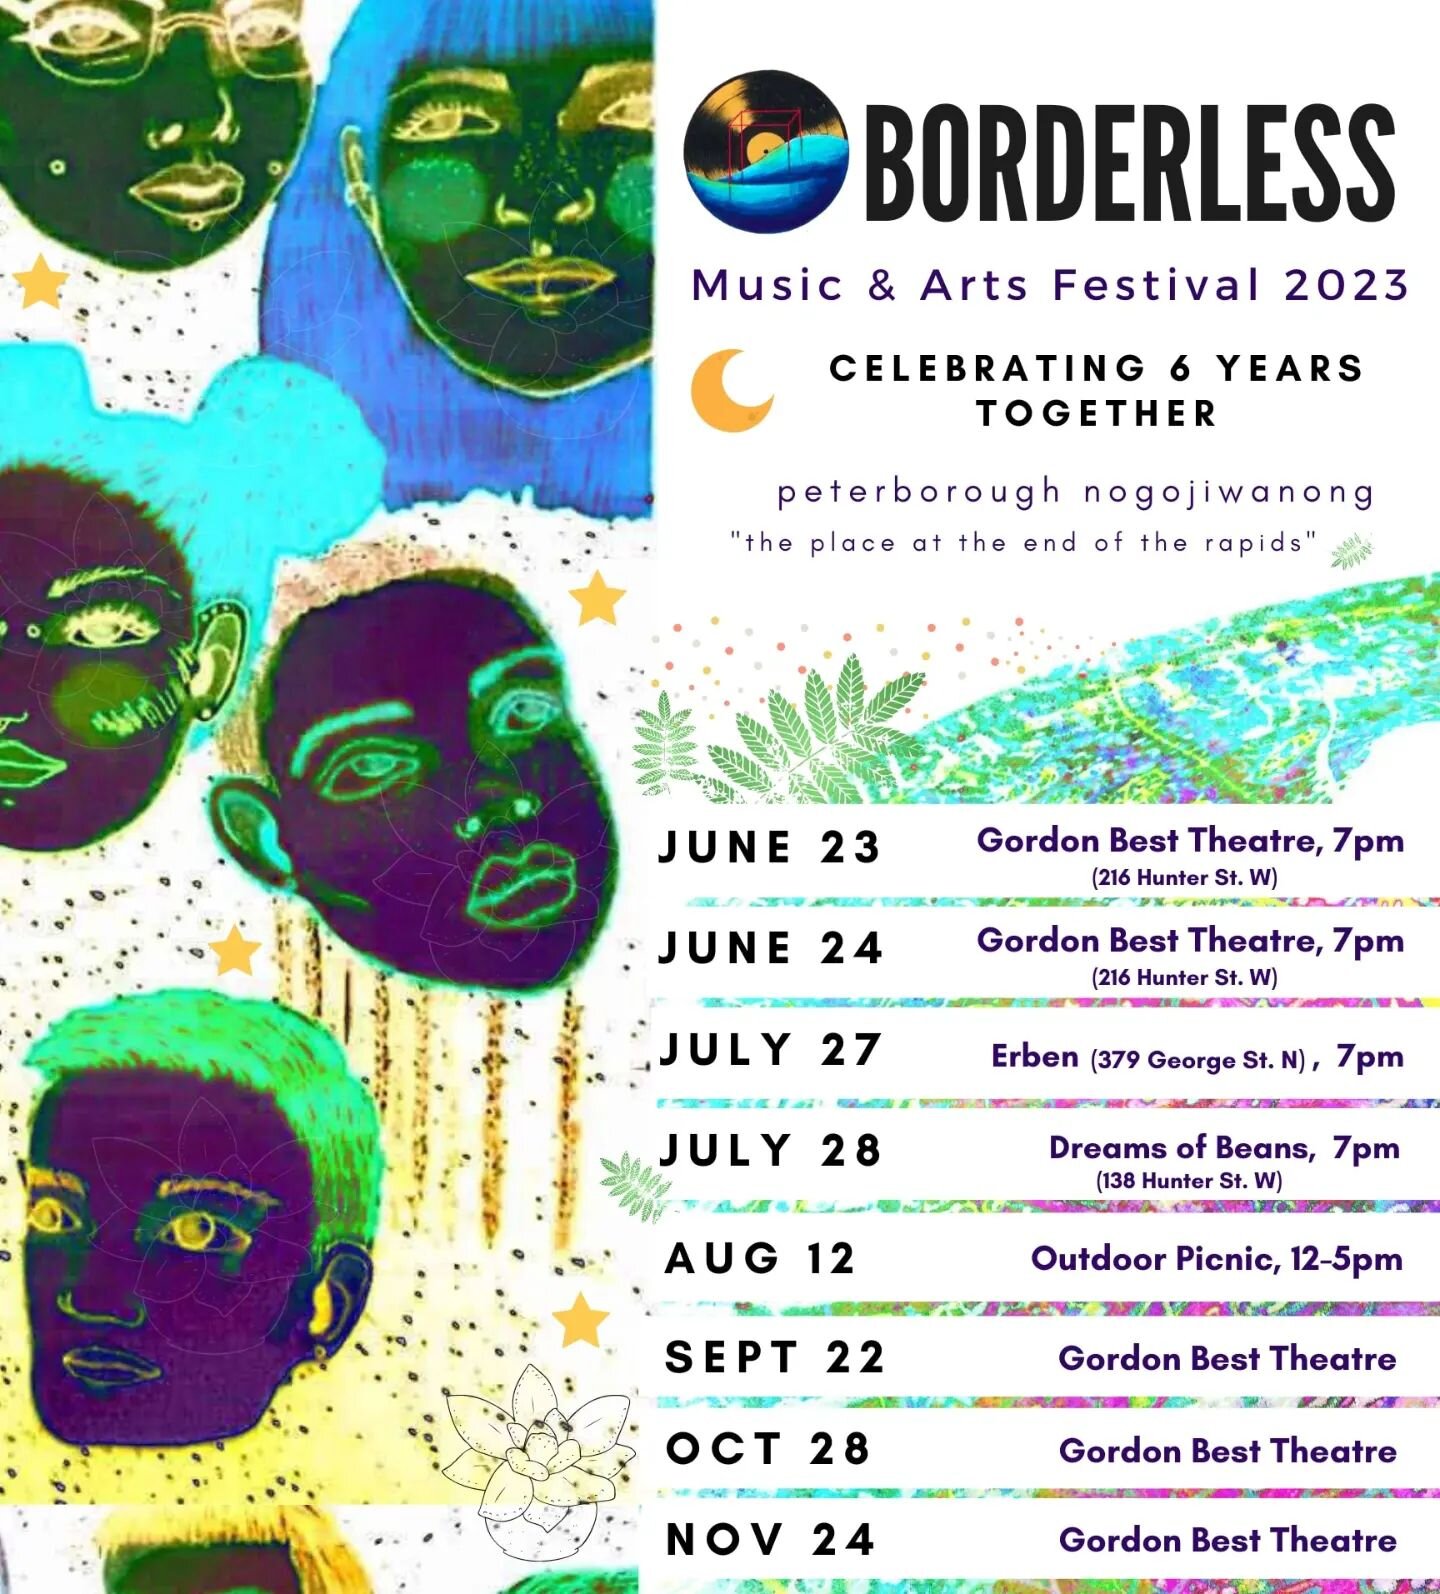 JUNE 23 at the @gordonbesttheatre Doors open at 7pm. 
Poetry by Robyn Pierson
Dance by Mintu Maria James
Music by 
The Colton Sisters
Harbhajunkie
Will Ward
Shahrazi

Pop-up booth by @indigenously.infused 

Tickets available online 
and at the door. 